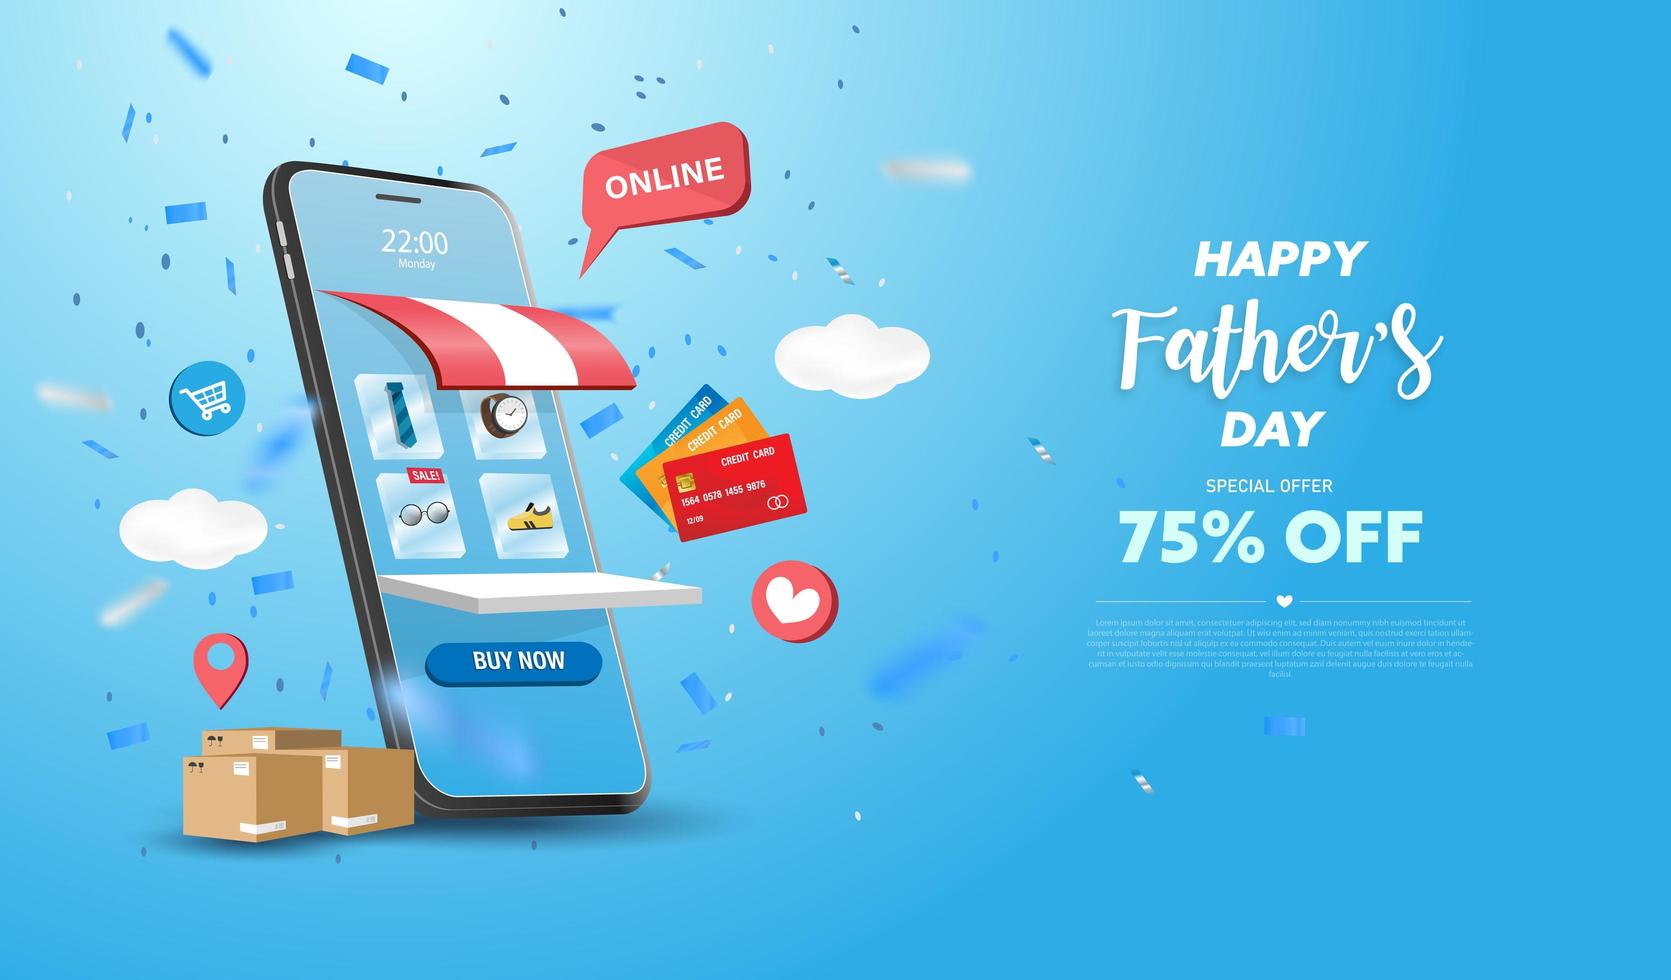 Happy Father S Day Sale Banner Smart Phone Design 1084303 Download Free Vectors Clipart Graphics Vector Art In catholic countries of europe. https www vecteezy com vector art 1084303 happy father s day sale banner smart phone design